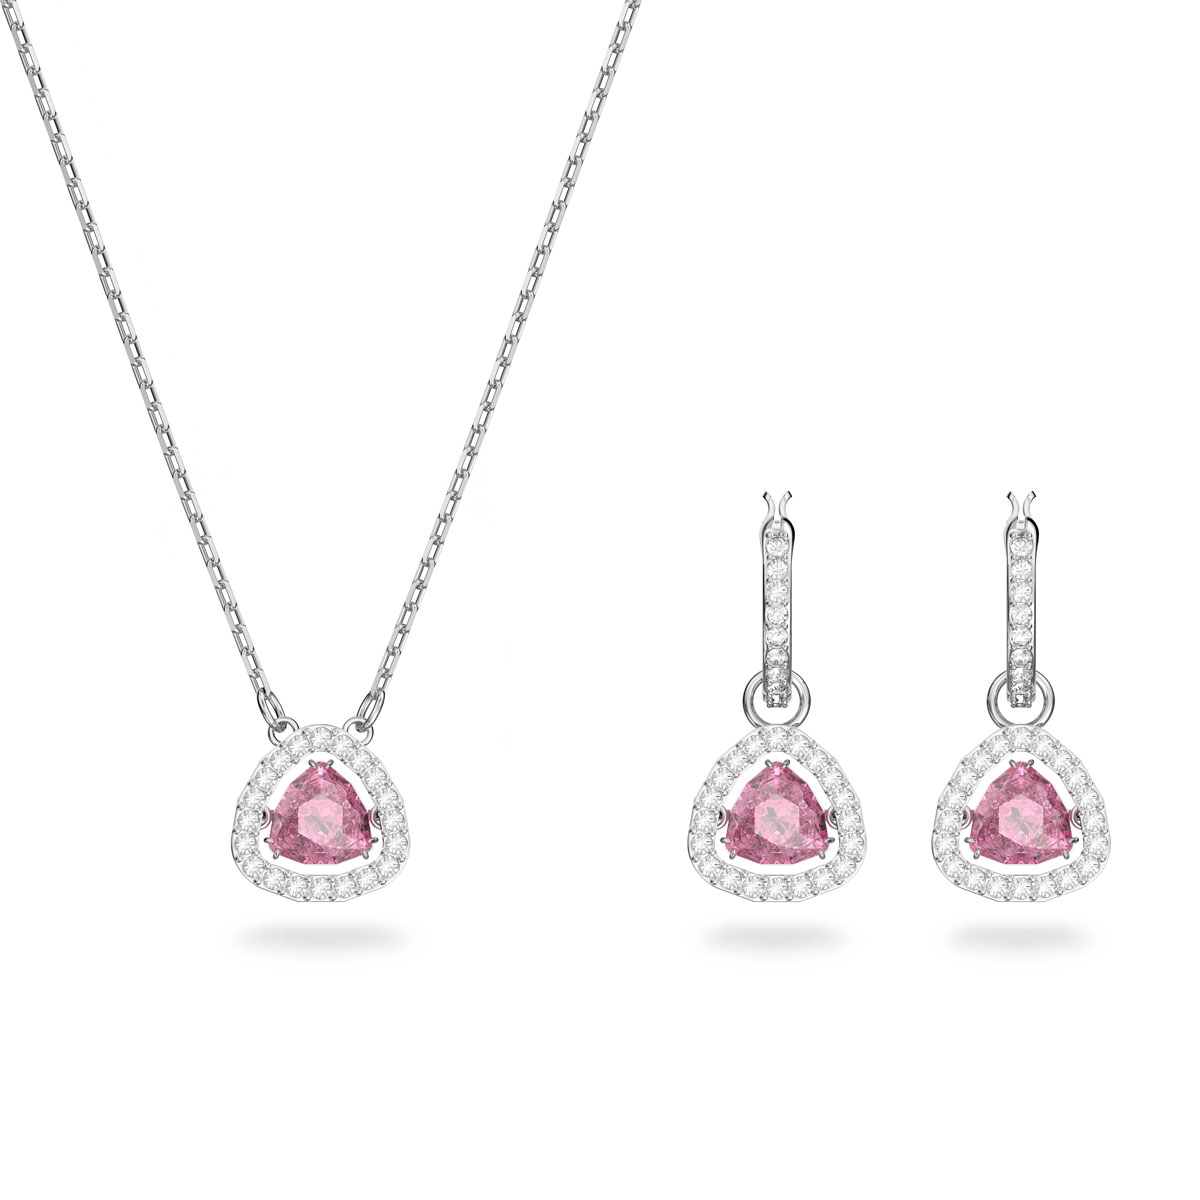 Swarovski Pink and Rhodium Plated Pierced Earrings and Necklace Millenia Set